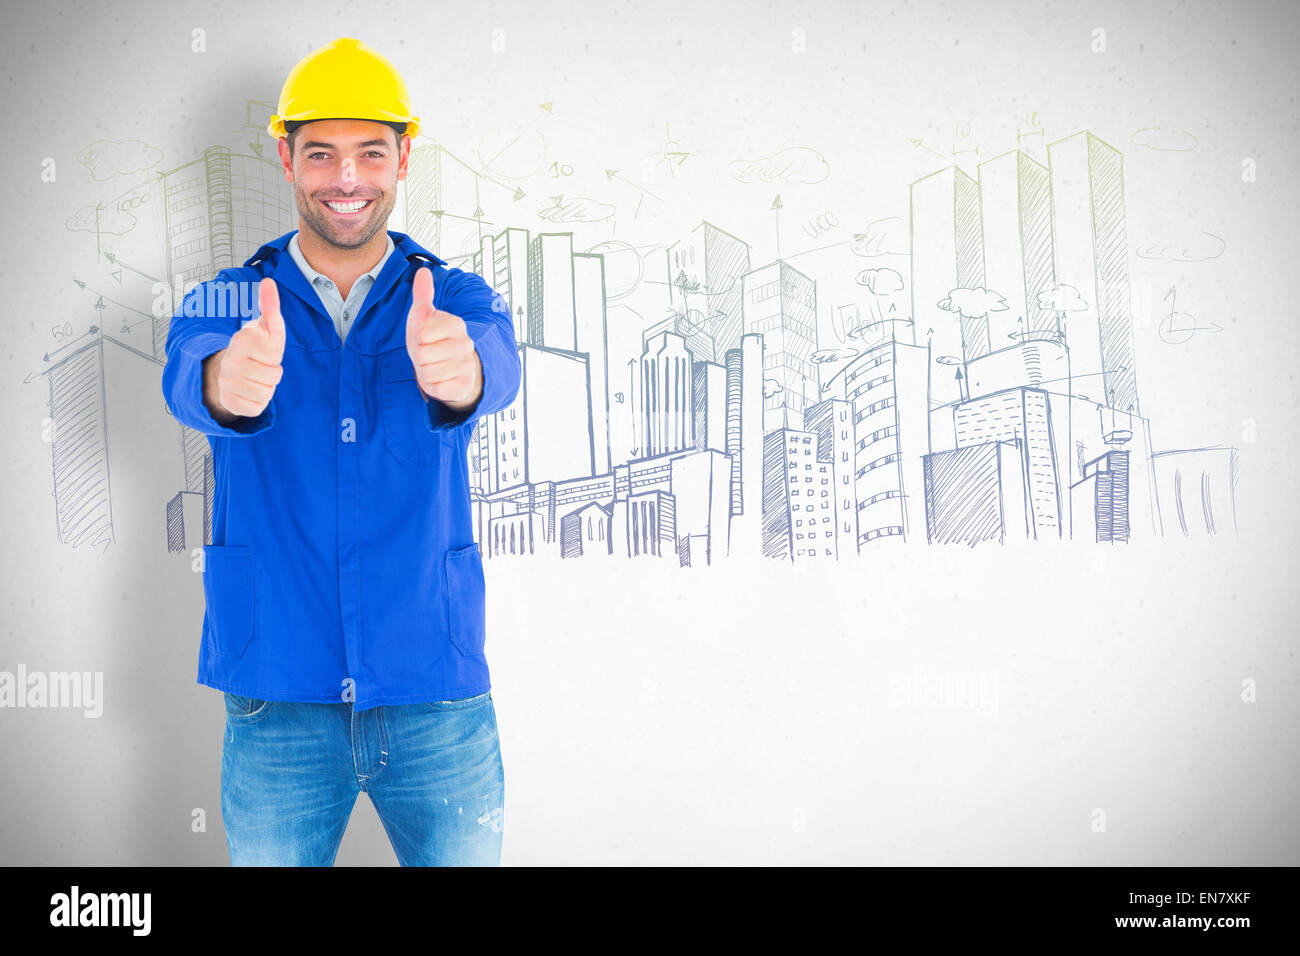 Composite image of portrait of happy manual worker gesturing thumbs up Stock Photo